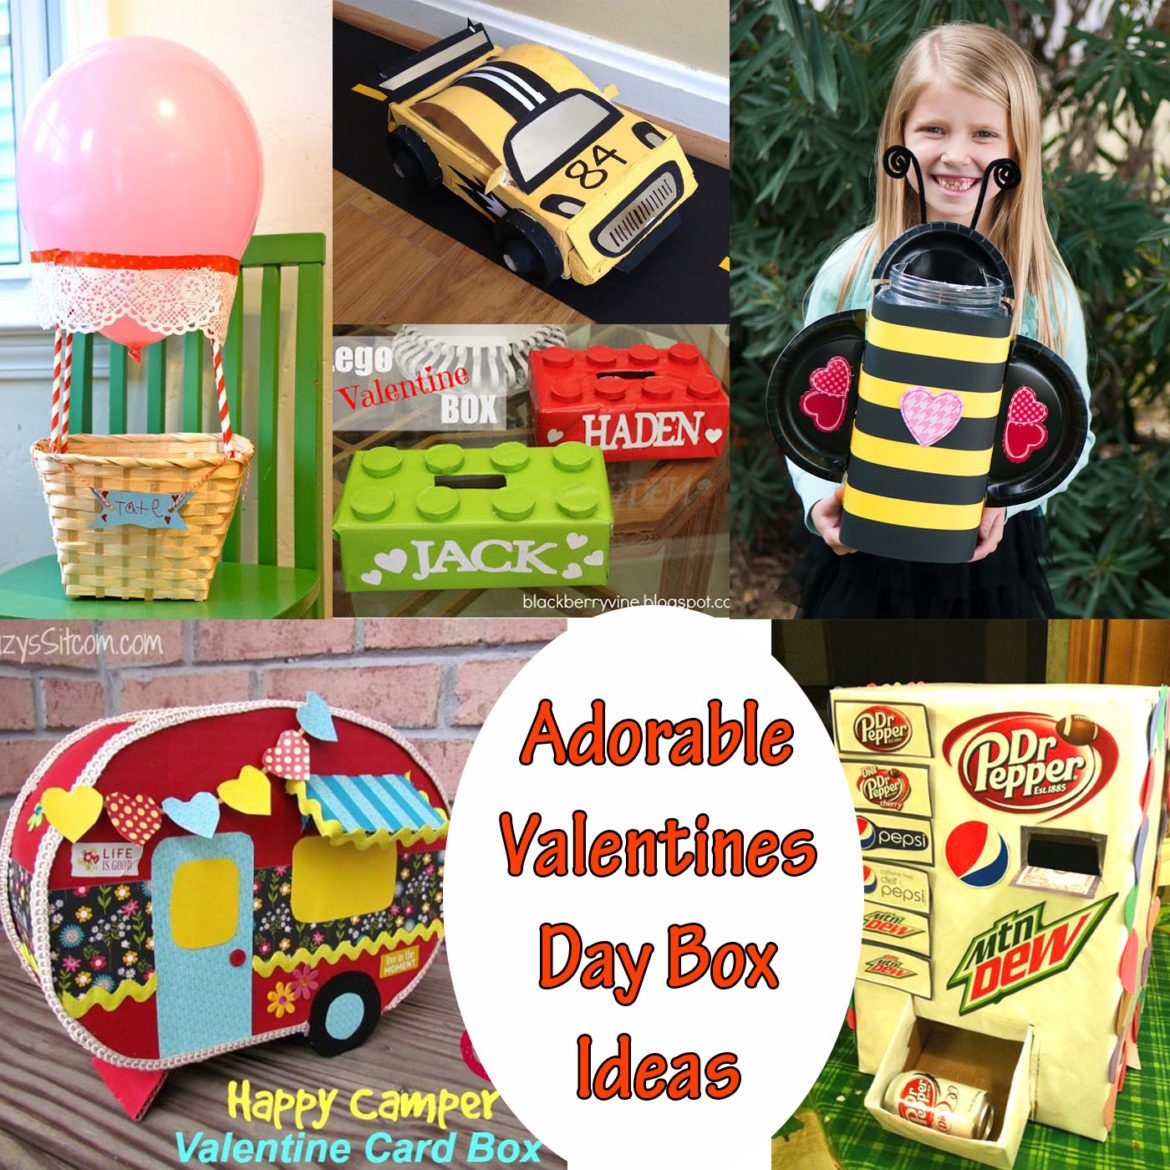 Valentines Day Card Box Ideas
 Adorable Valentines Day Box Ideas The Keeper of the Cheerios